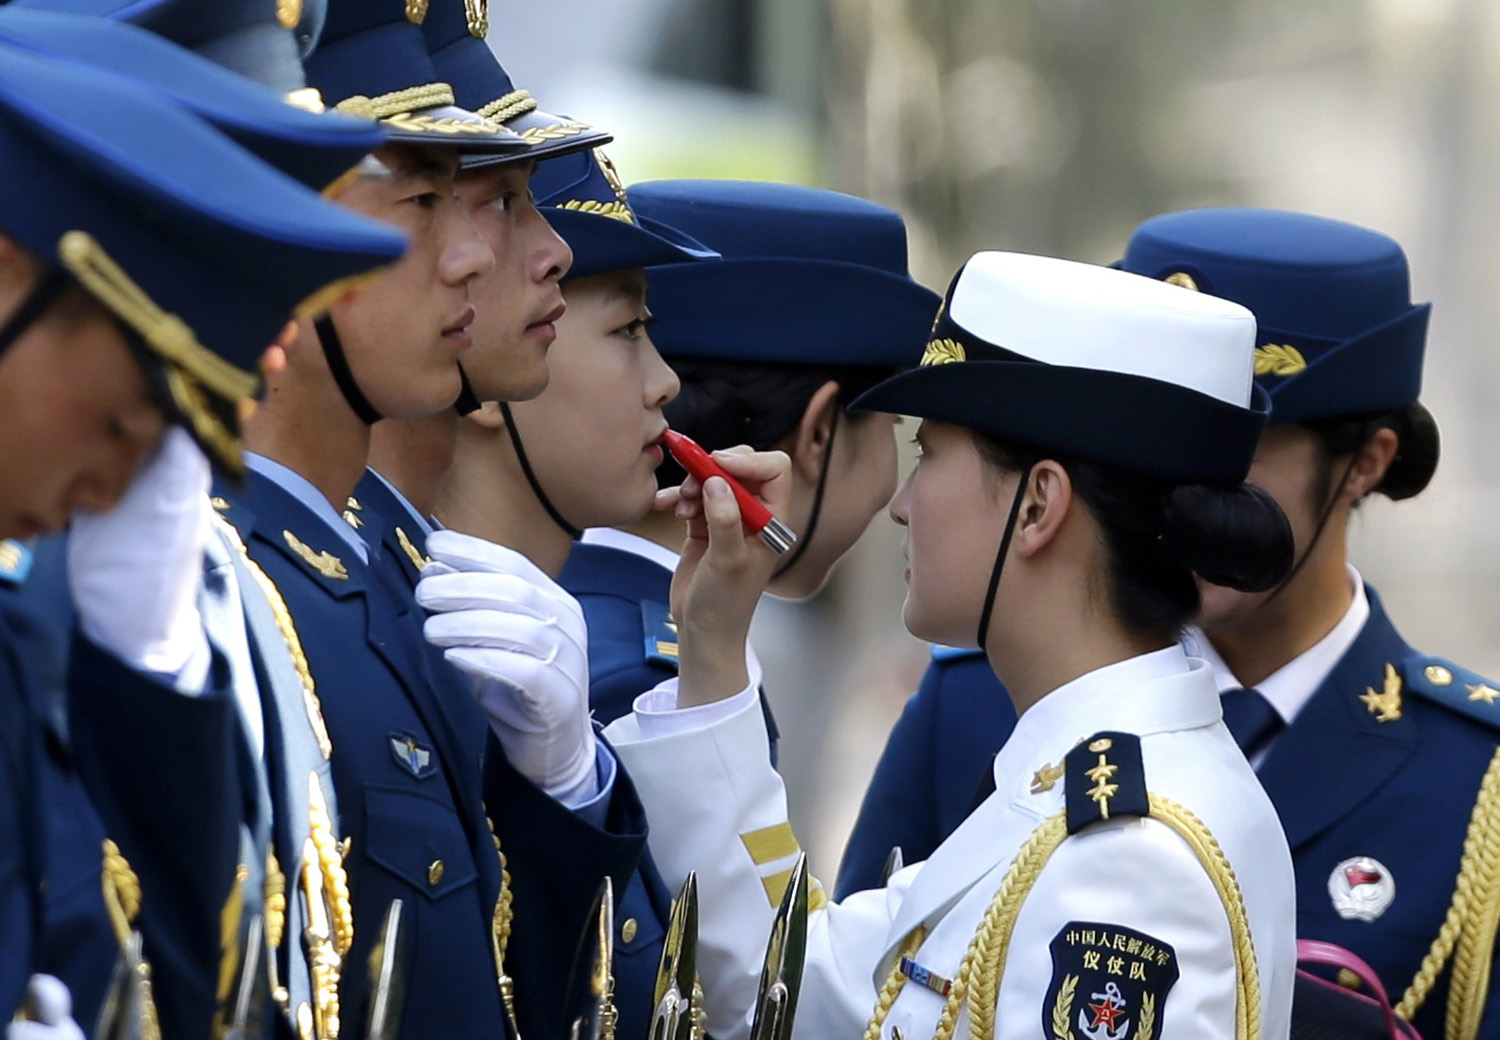 A female honour guard has lipstick applied as they prepare for an official welcoming ceremony for Italy's Prime Minister Matteo Renzi outside the Great Hall of the People in Beijing, June 11, 2014.